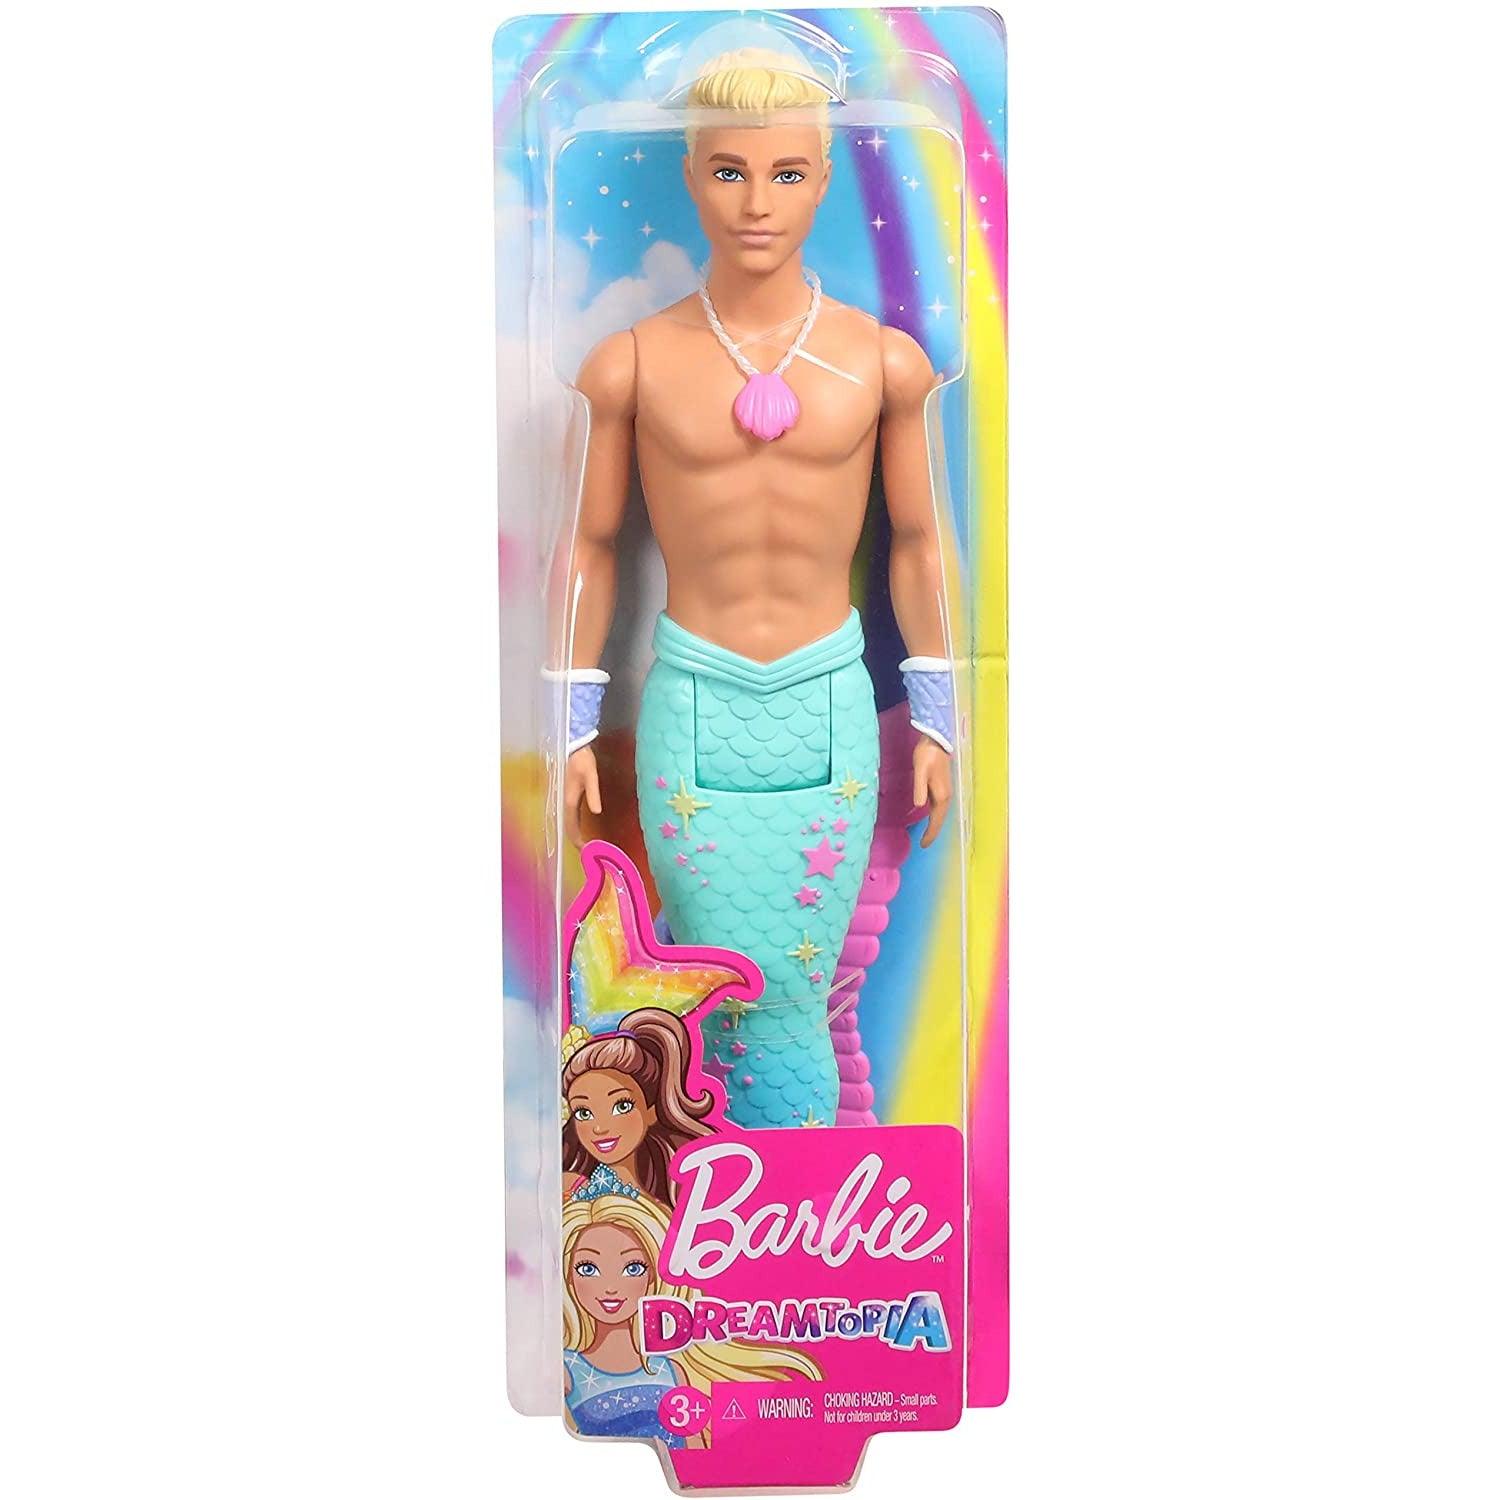 Barbie Dreamtopia Merman Doll, Approx. 12-Inch with Blue Rainbow Tail and Blonde Hair - BumbleToys - 5-7 Years, Barbie, Fashion Dolls & Accessories, Girls, Mermaid, Pre-Order